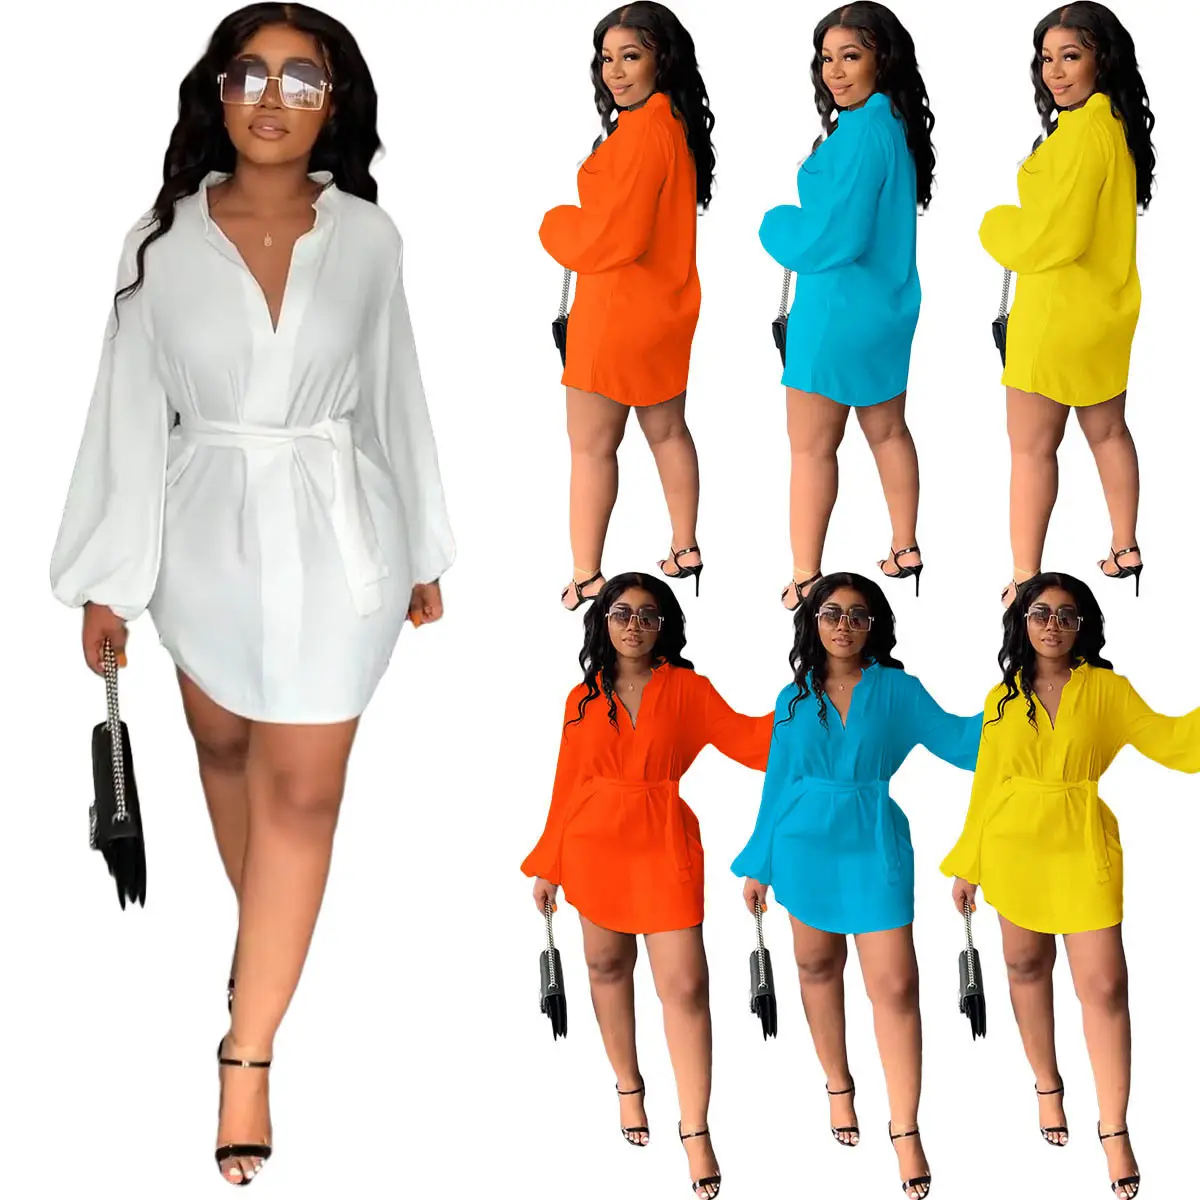 Wholesale Women's fashion Sexy Party Club Long Sleeve Clothes Casual Mini Dress